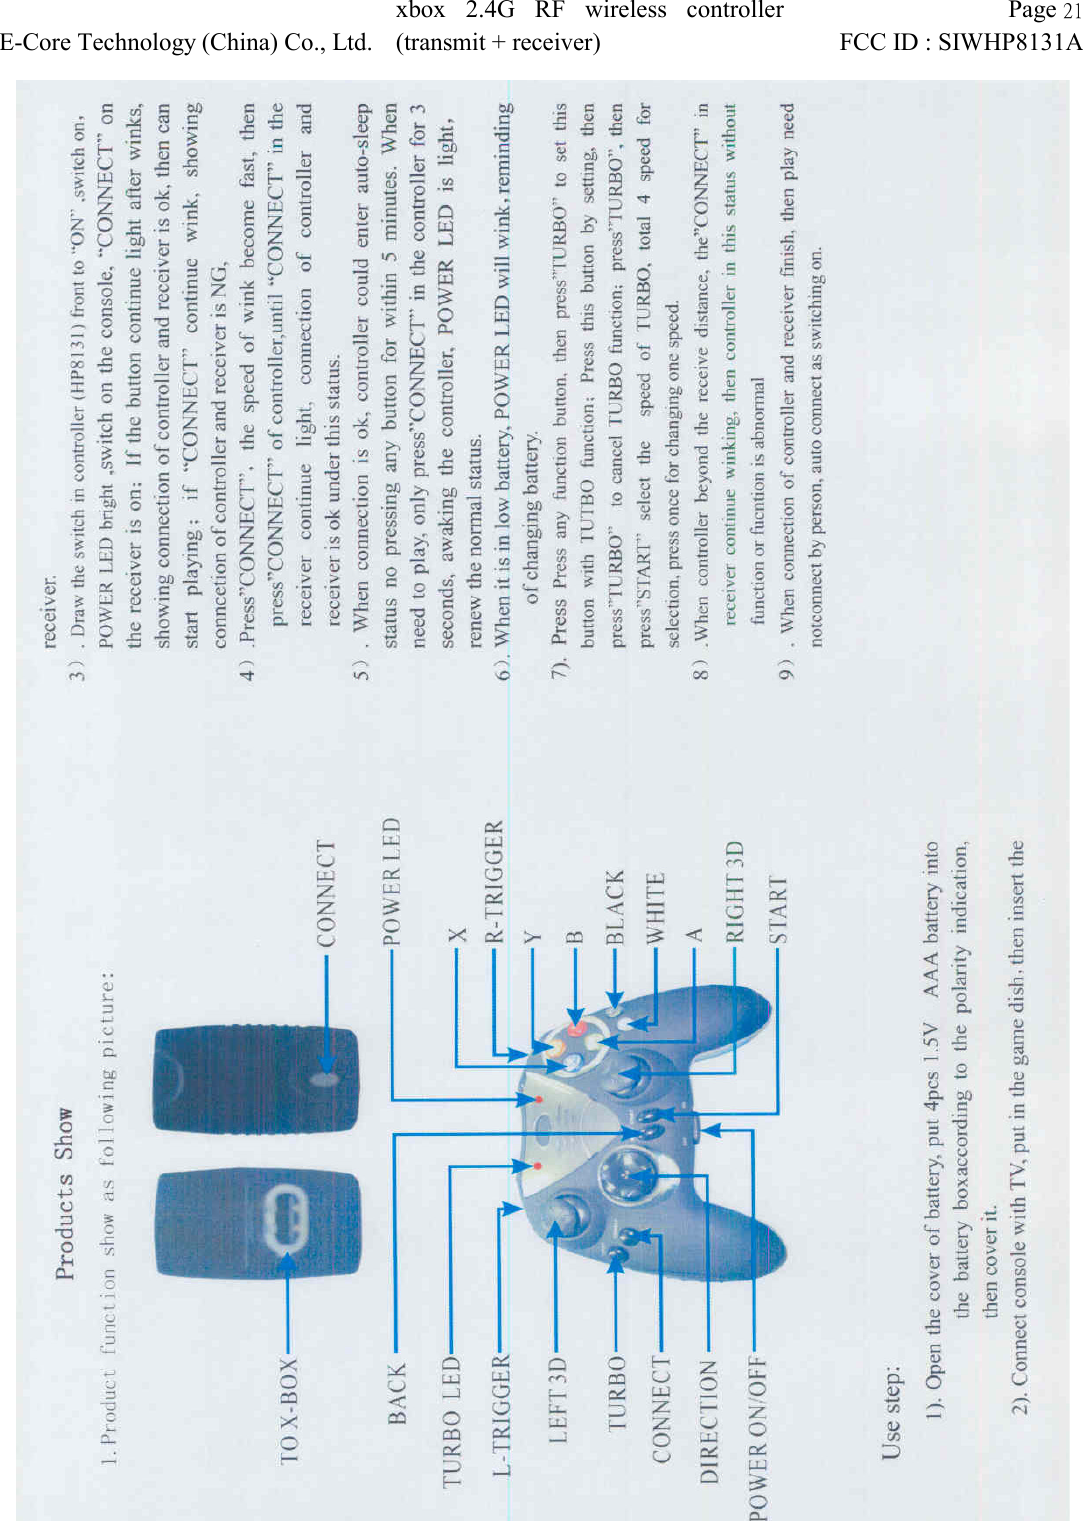  Page 21 E-Core Technology (China) Co., Ltd. xbox 2.4G RF wireless controller (transmit + receiver) FCC ID : SIWHP8131A    